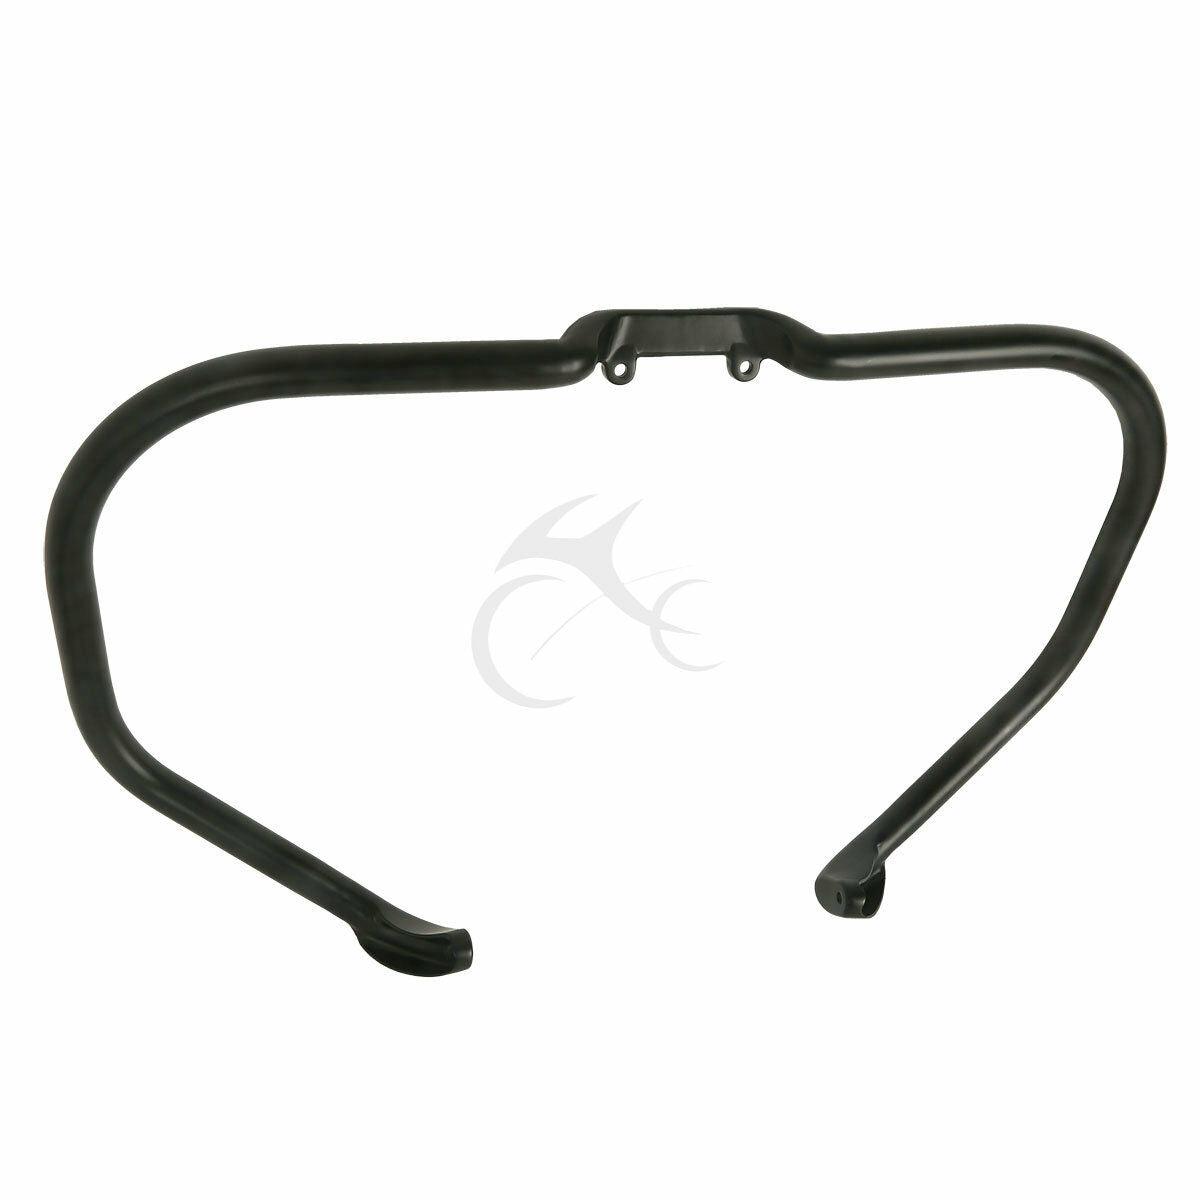 Highway Engine Guard Crash Bar Fit For Indian Chief Chieftain Dark Horse 14-2021 - Moto Life Products